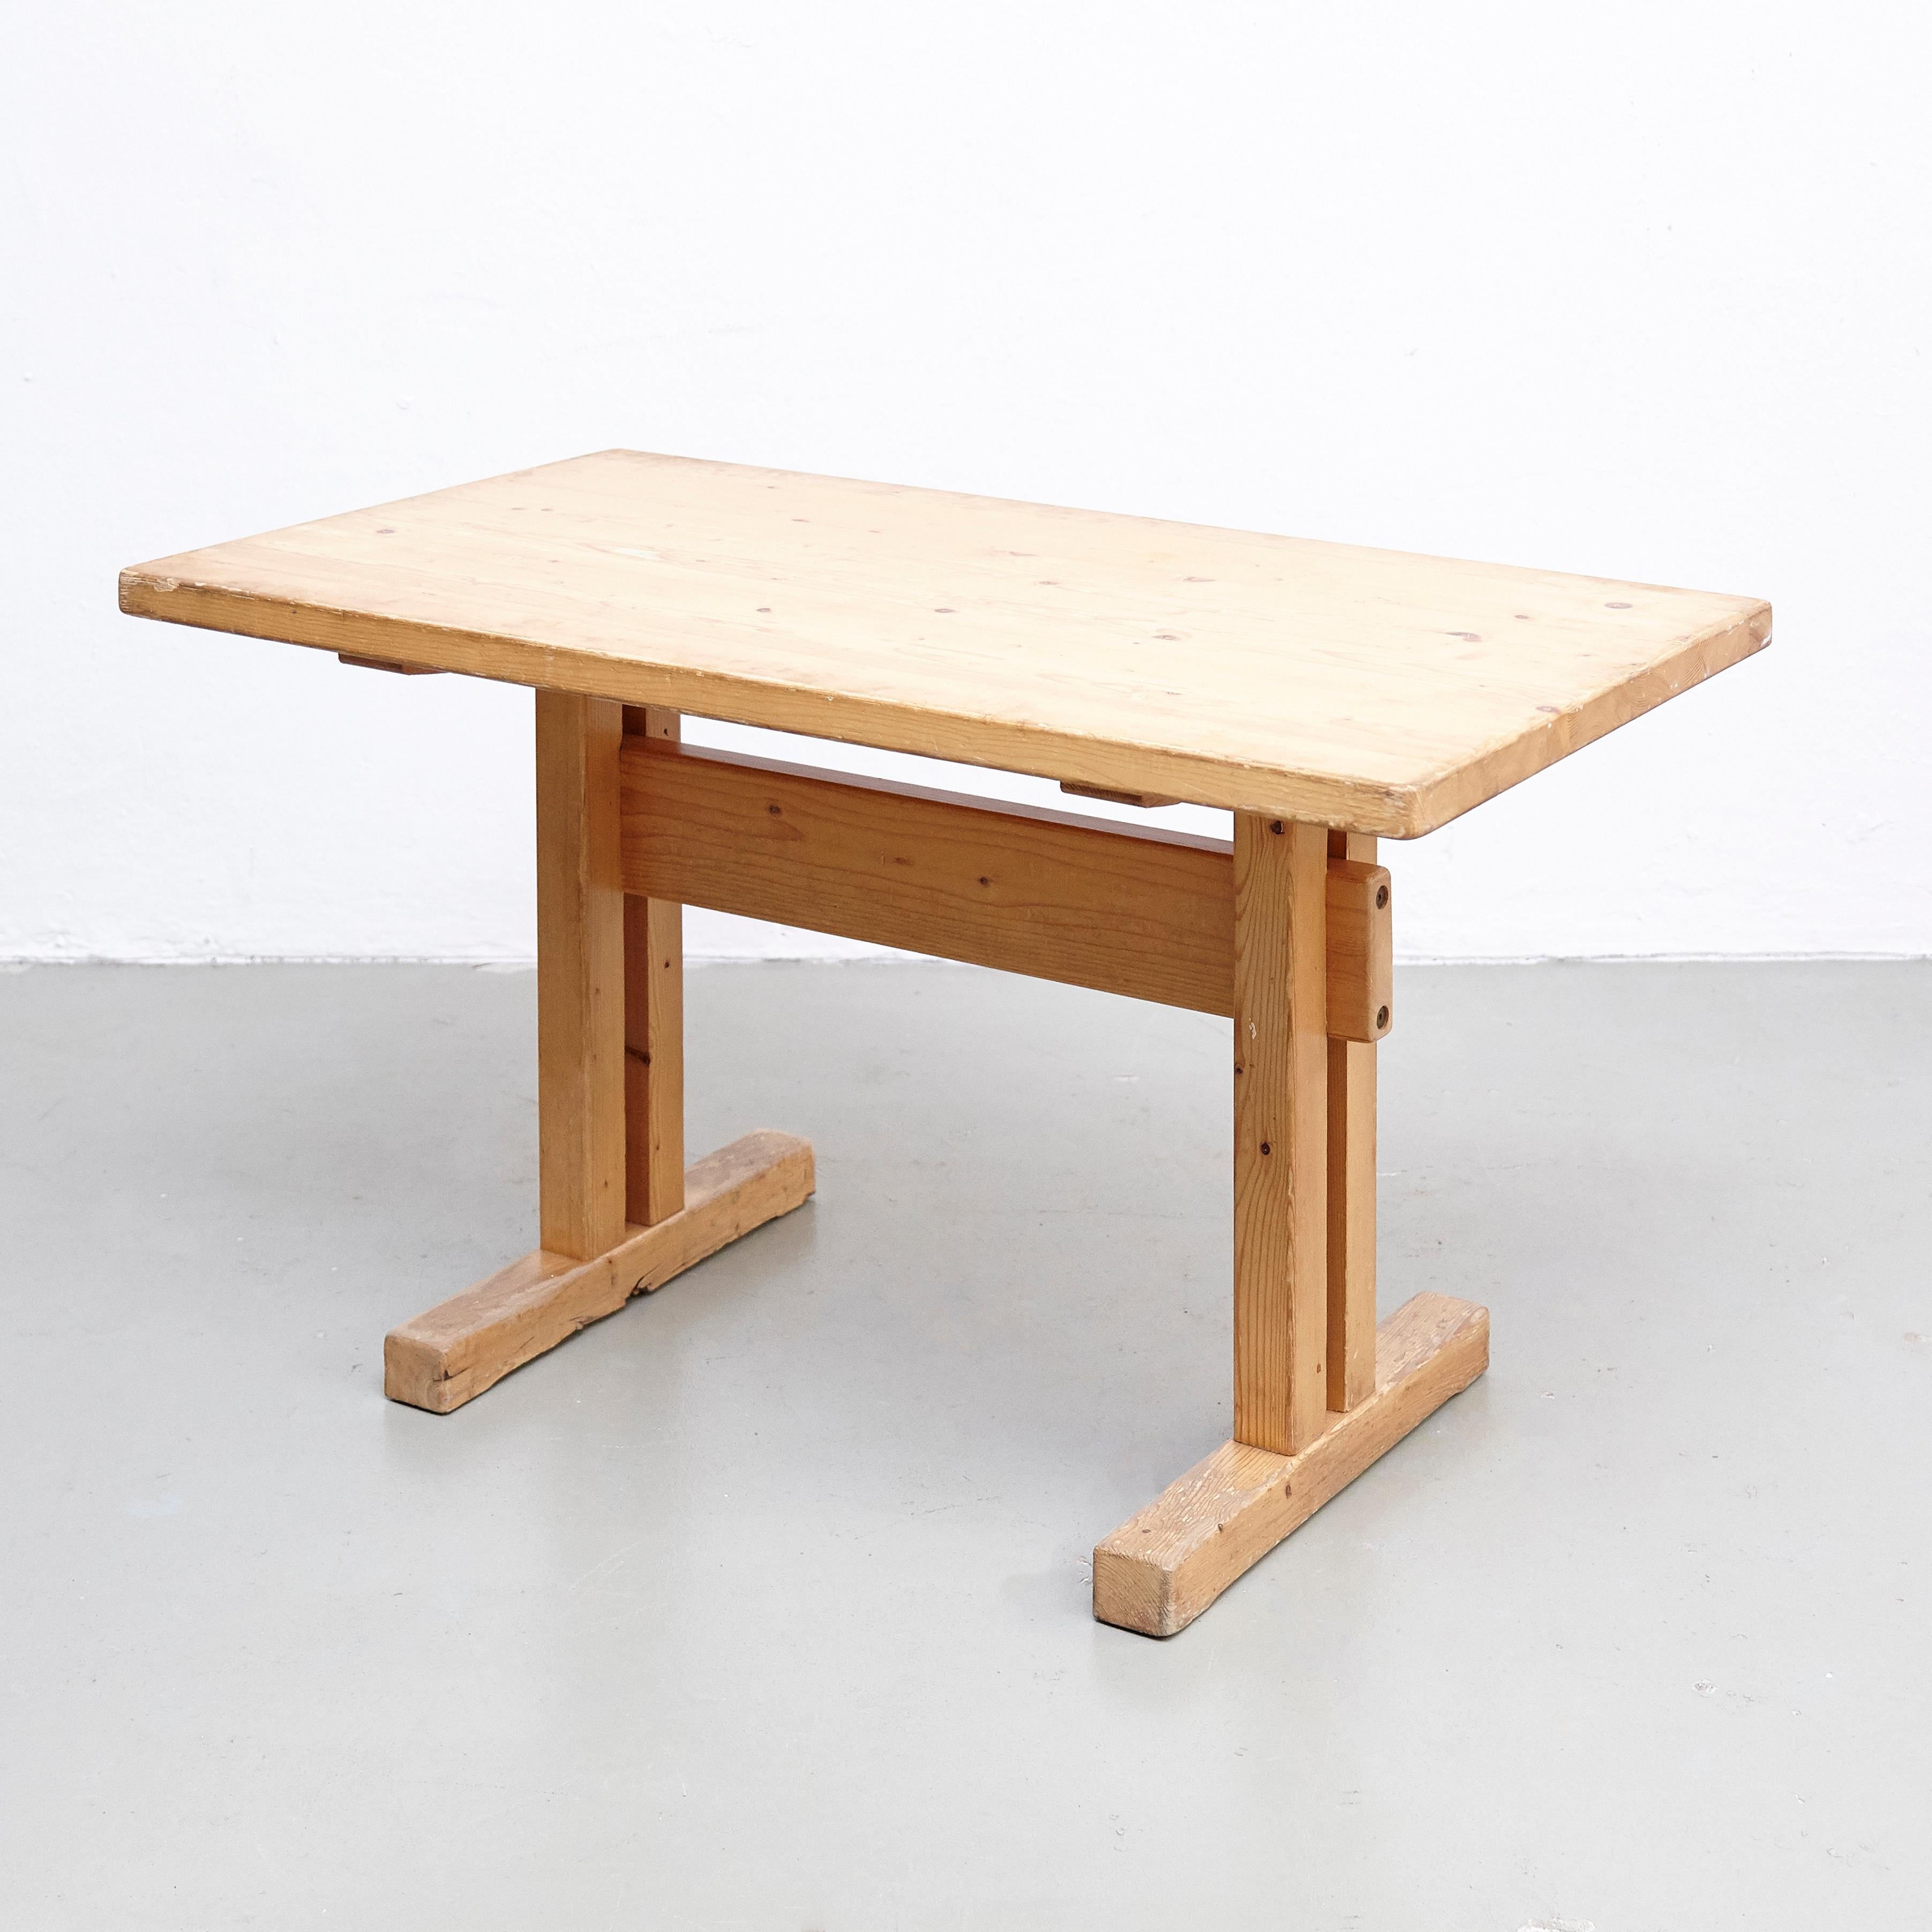 French Charlotte Perriand, Mid Century Modern Small Wood Table for Les Arcs, circa 1960